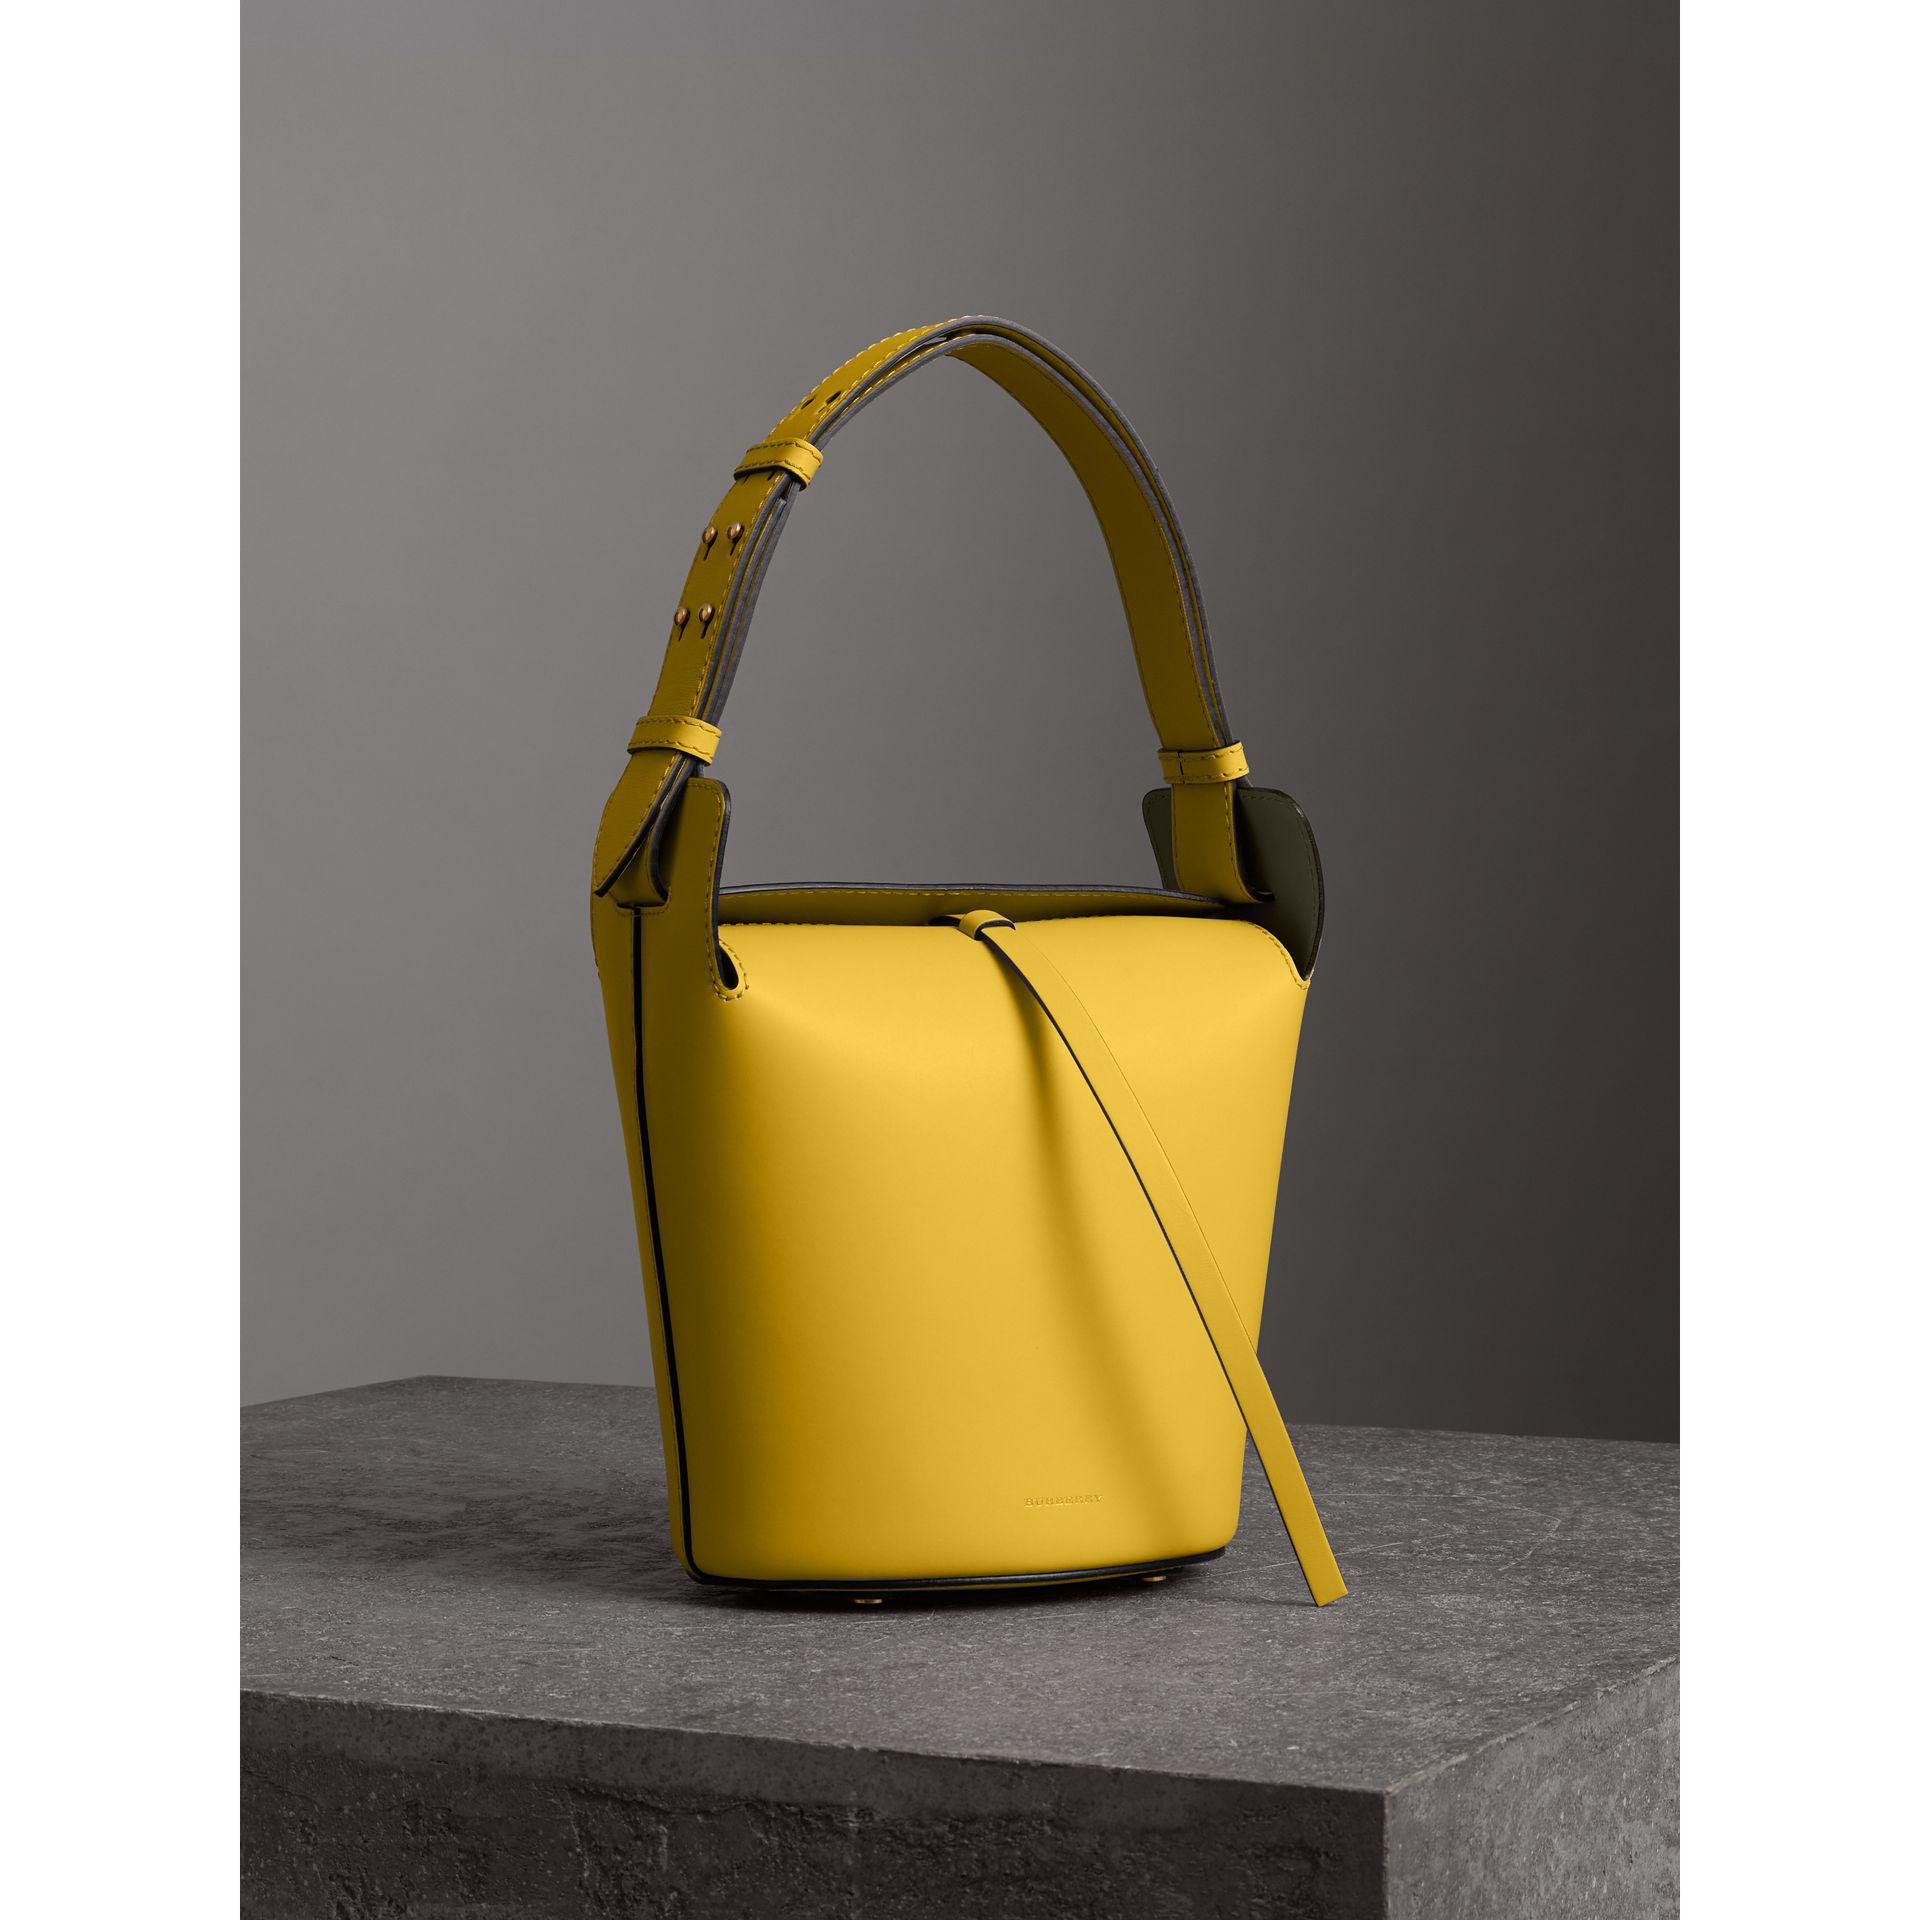 Burberry The Small Leather Bucket Bag in Yellow - Lyst